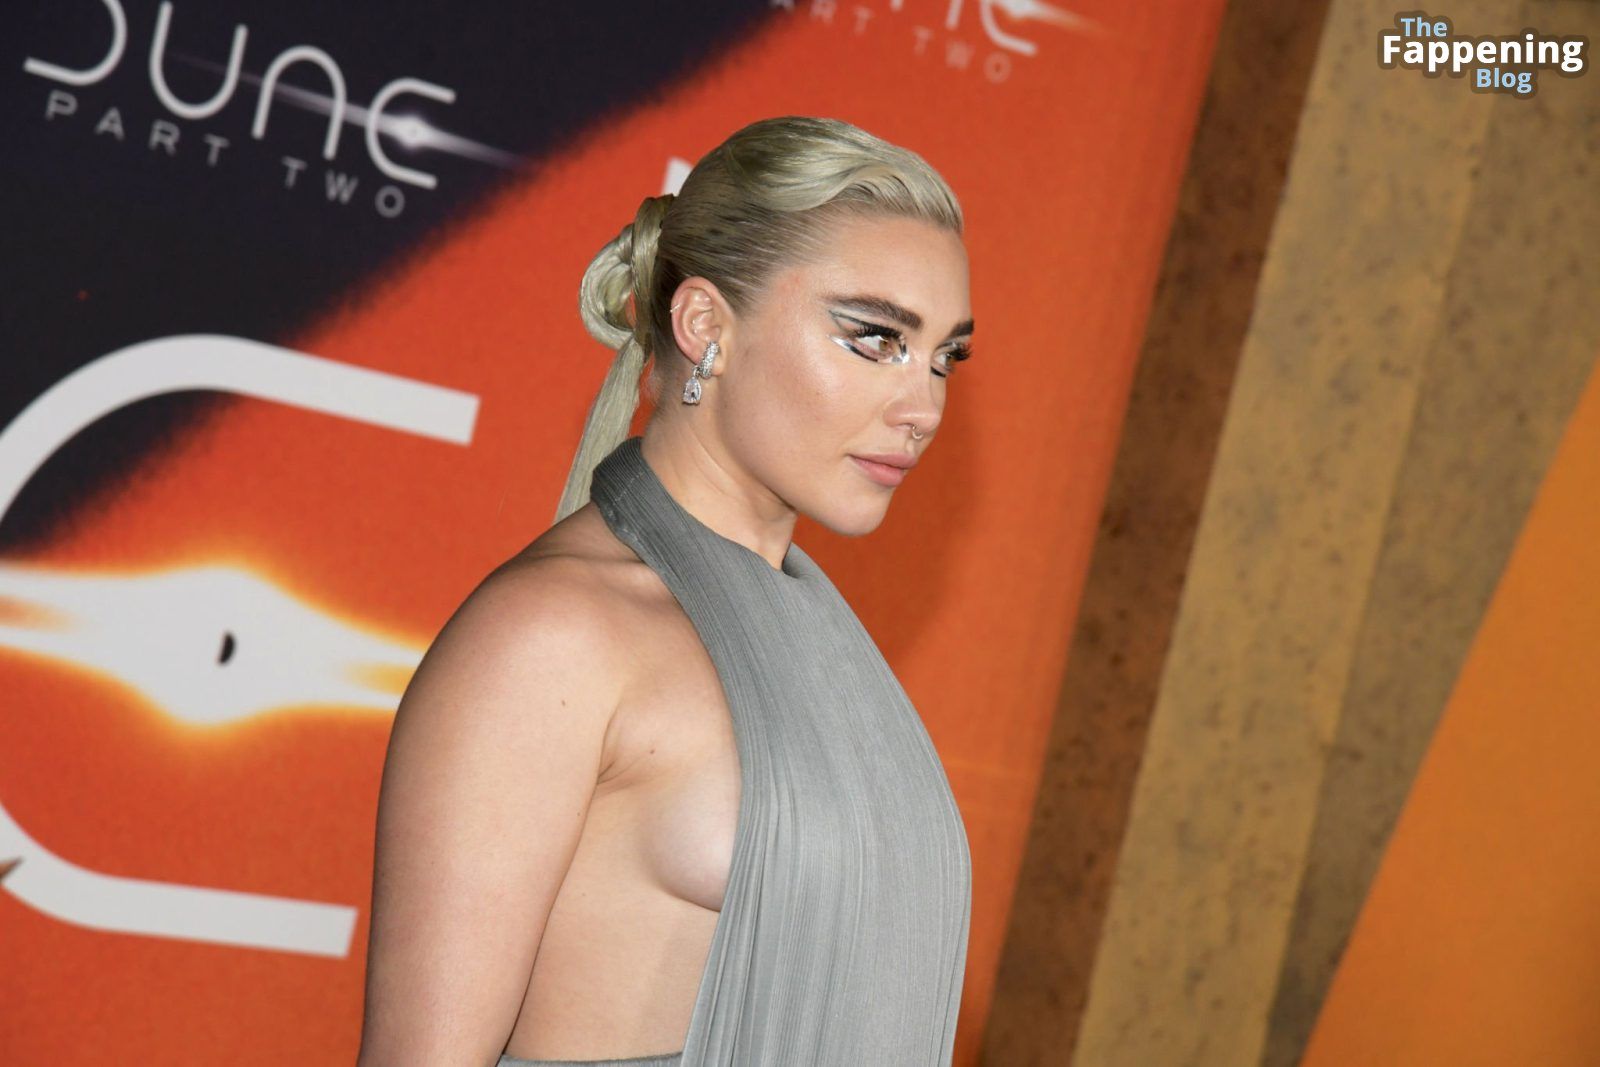 florence-pugh-braless-side-boobs-dune-part-two-premiere-nyc-16-1-thefappeningblog.com_.jpg